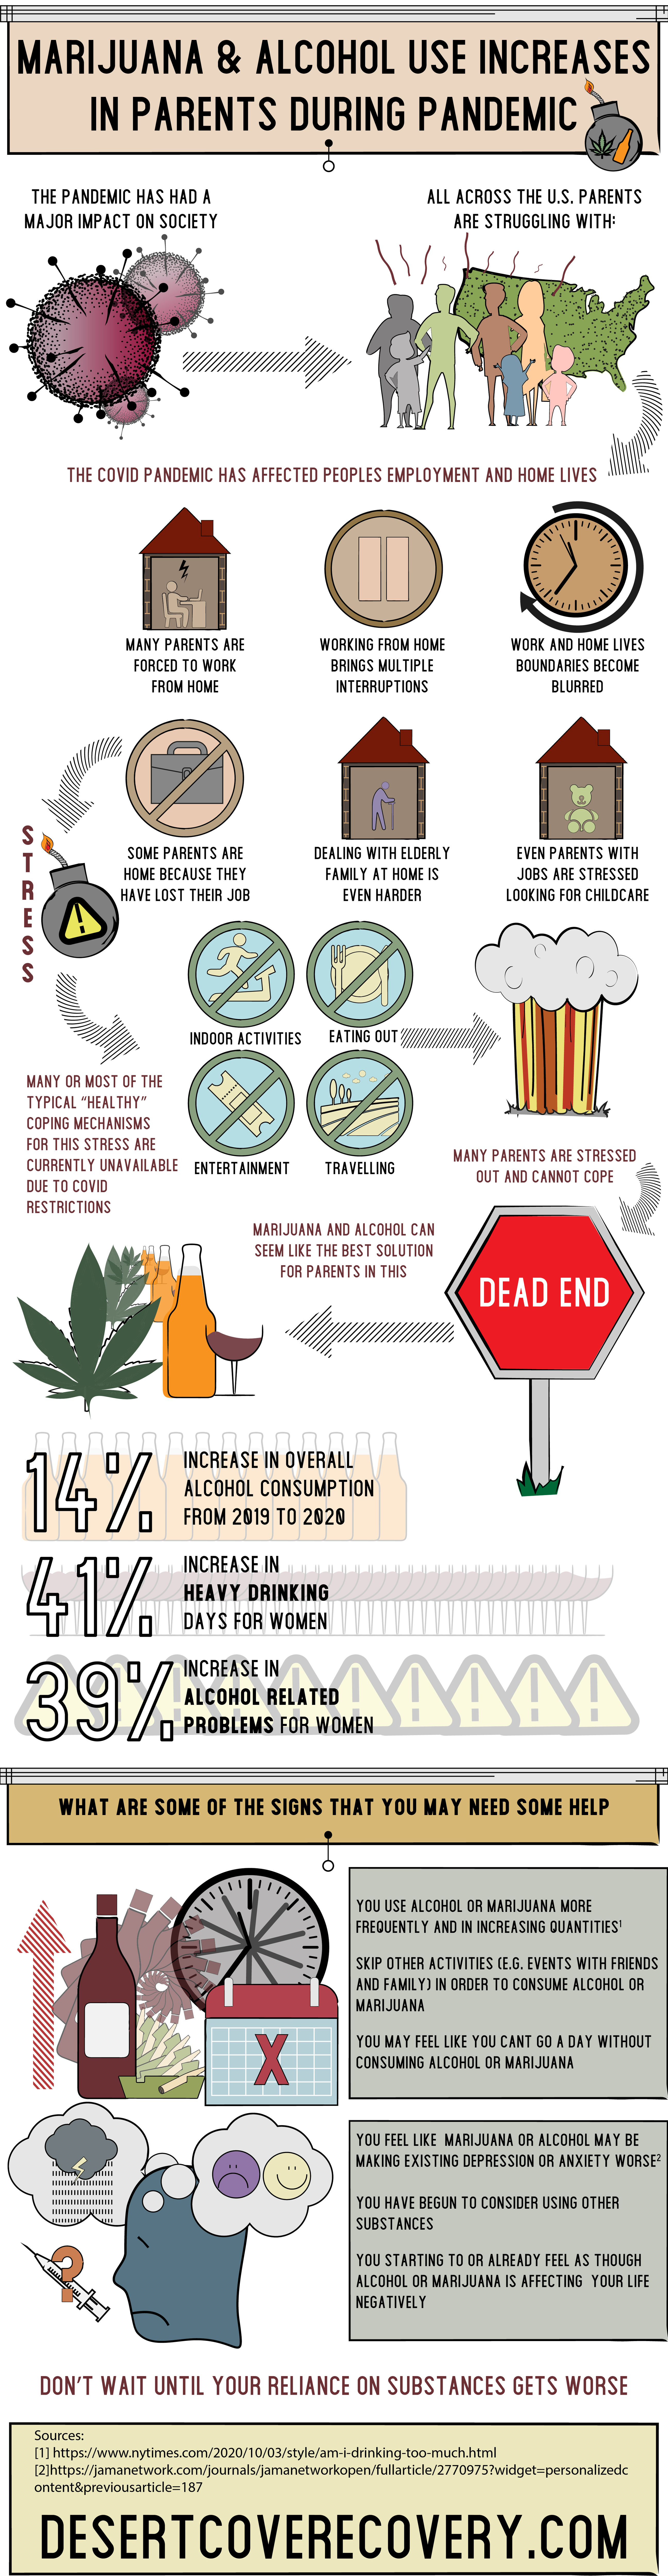 Marijuana & Alcohol Use Increases in Parents During Pandemic